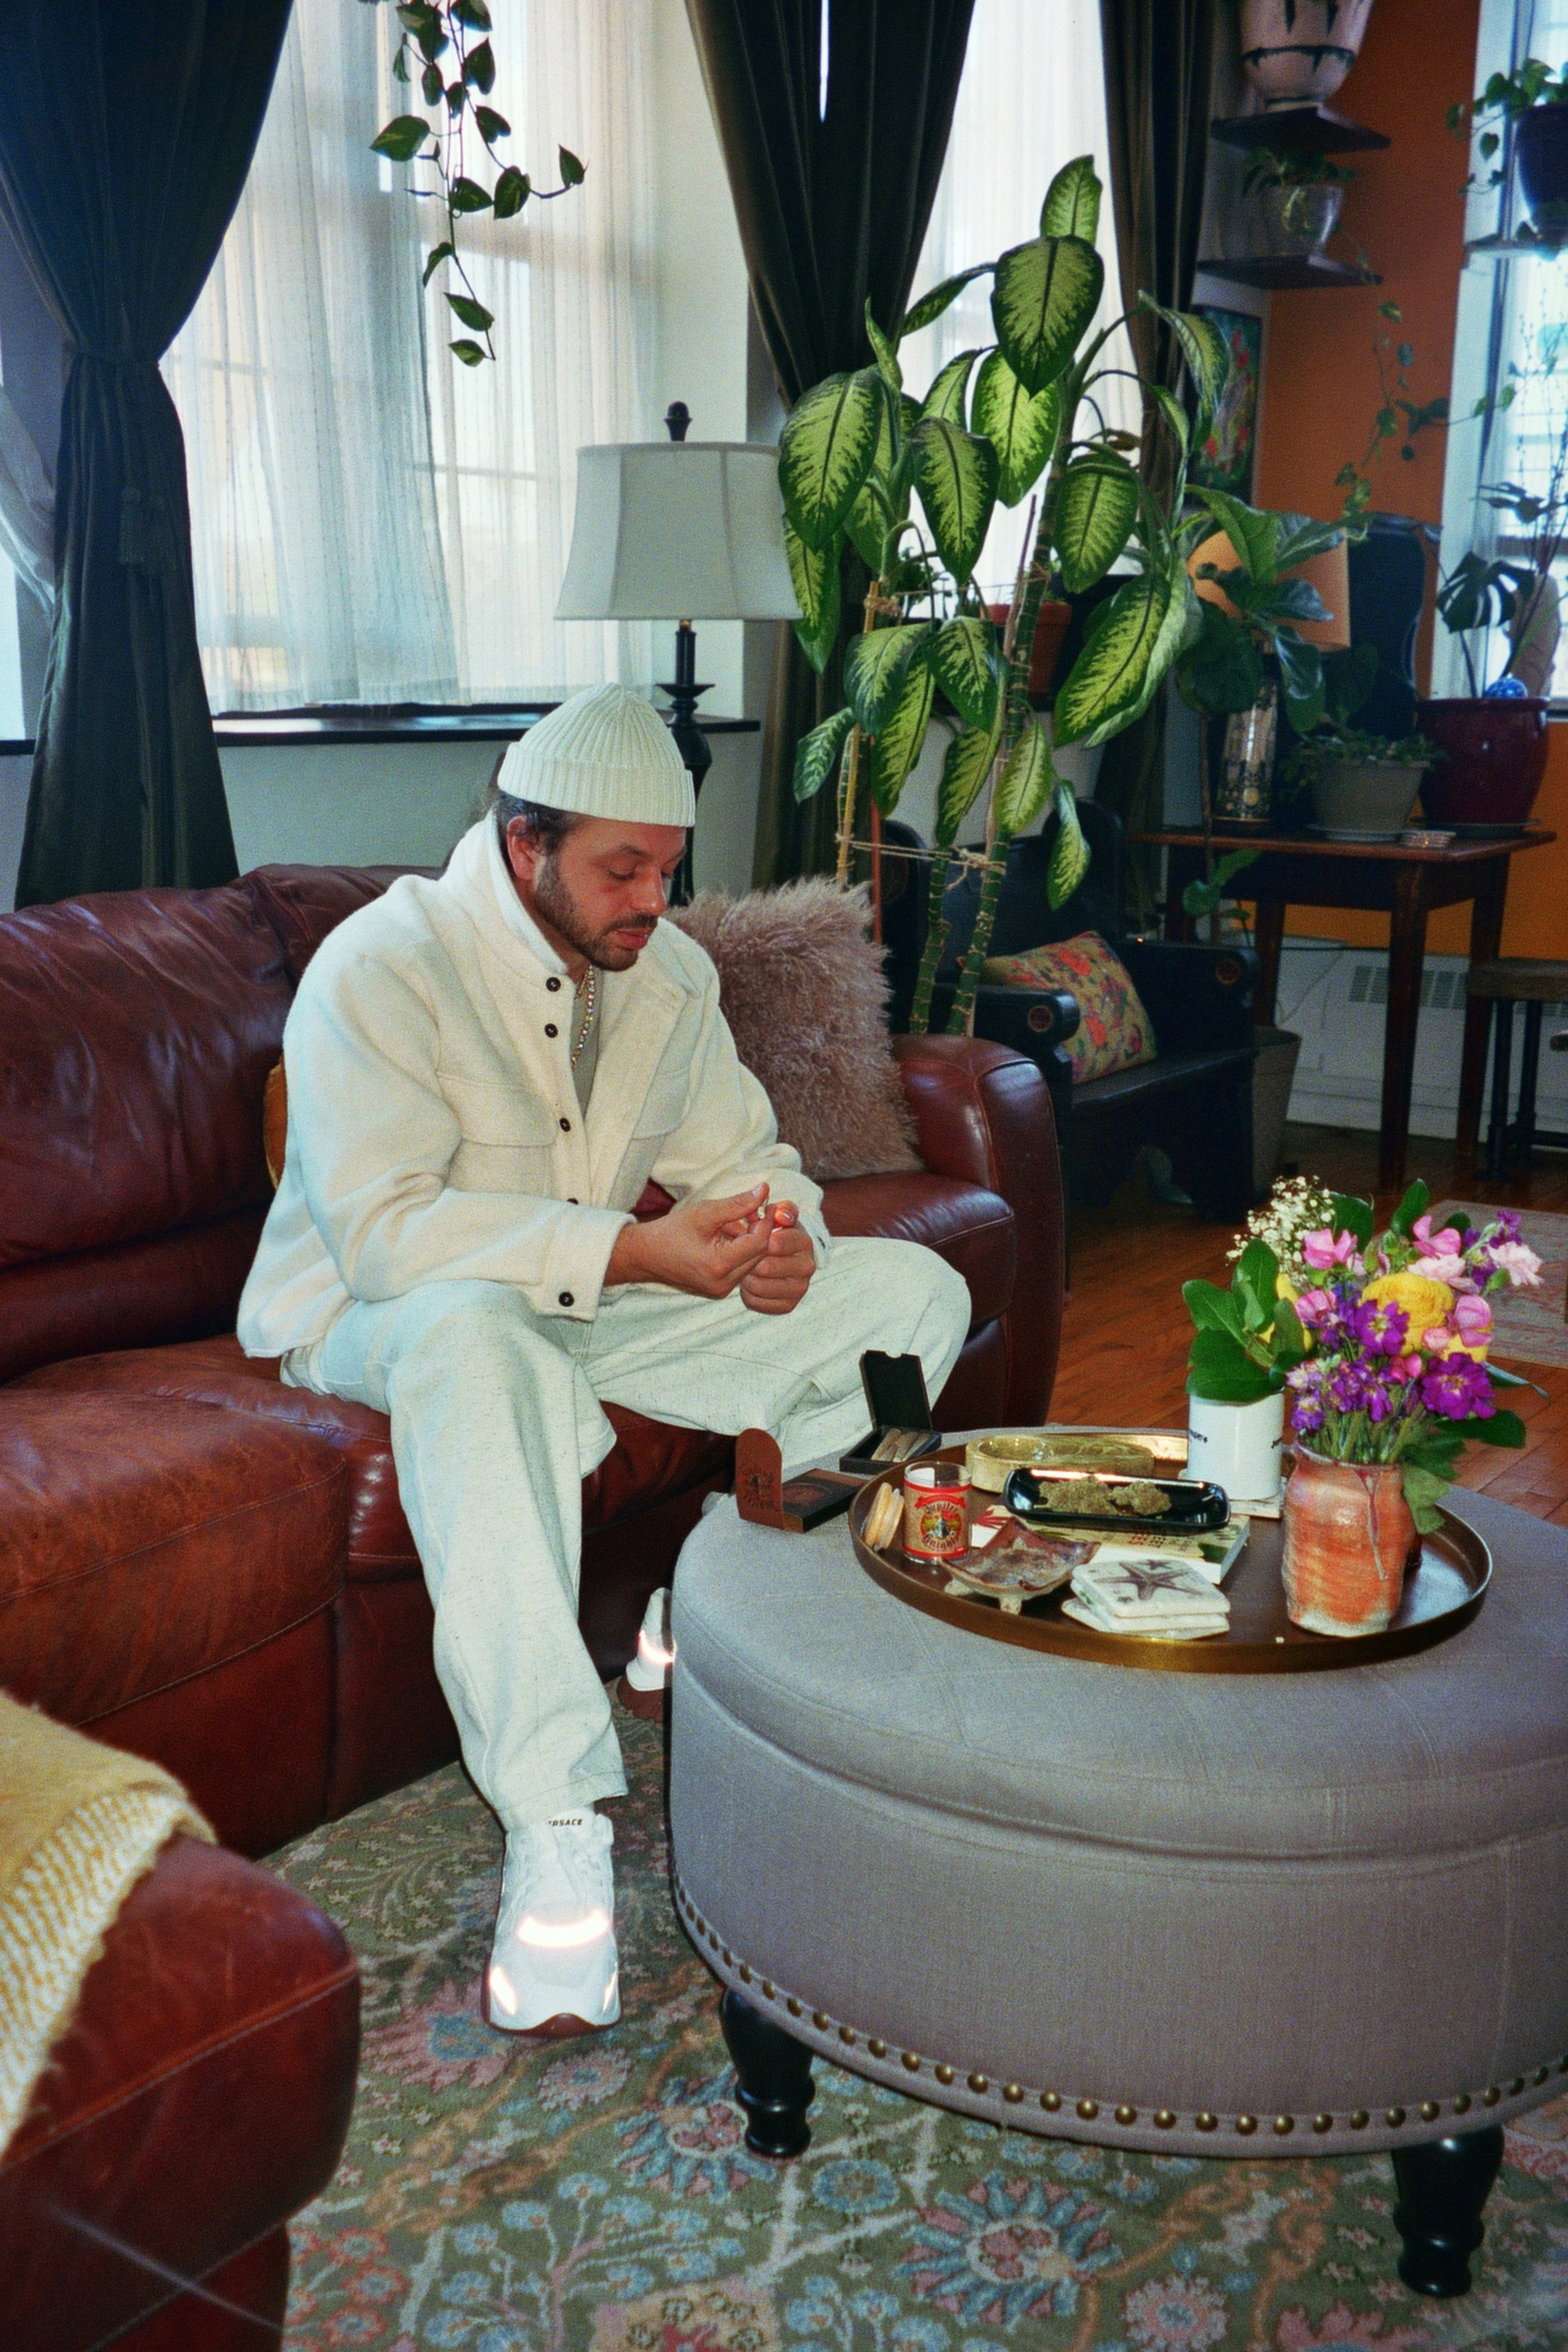 A man wearing all white sitting on a leather couch in a living room for a photoshoot.